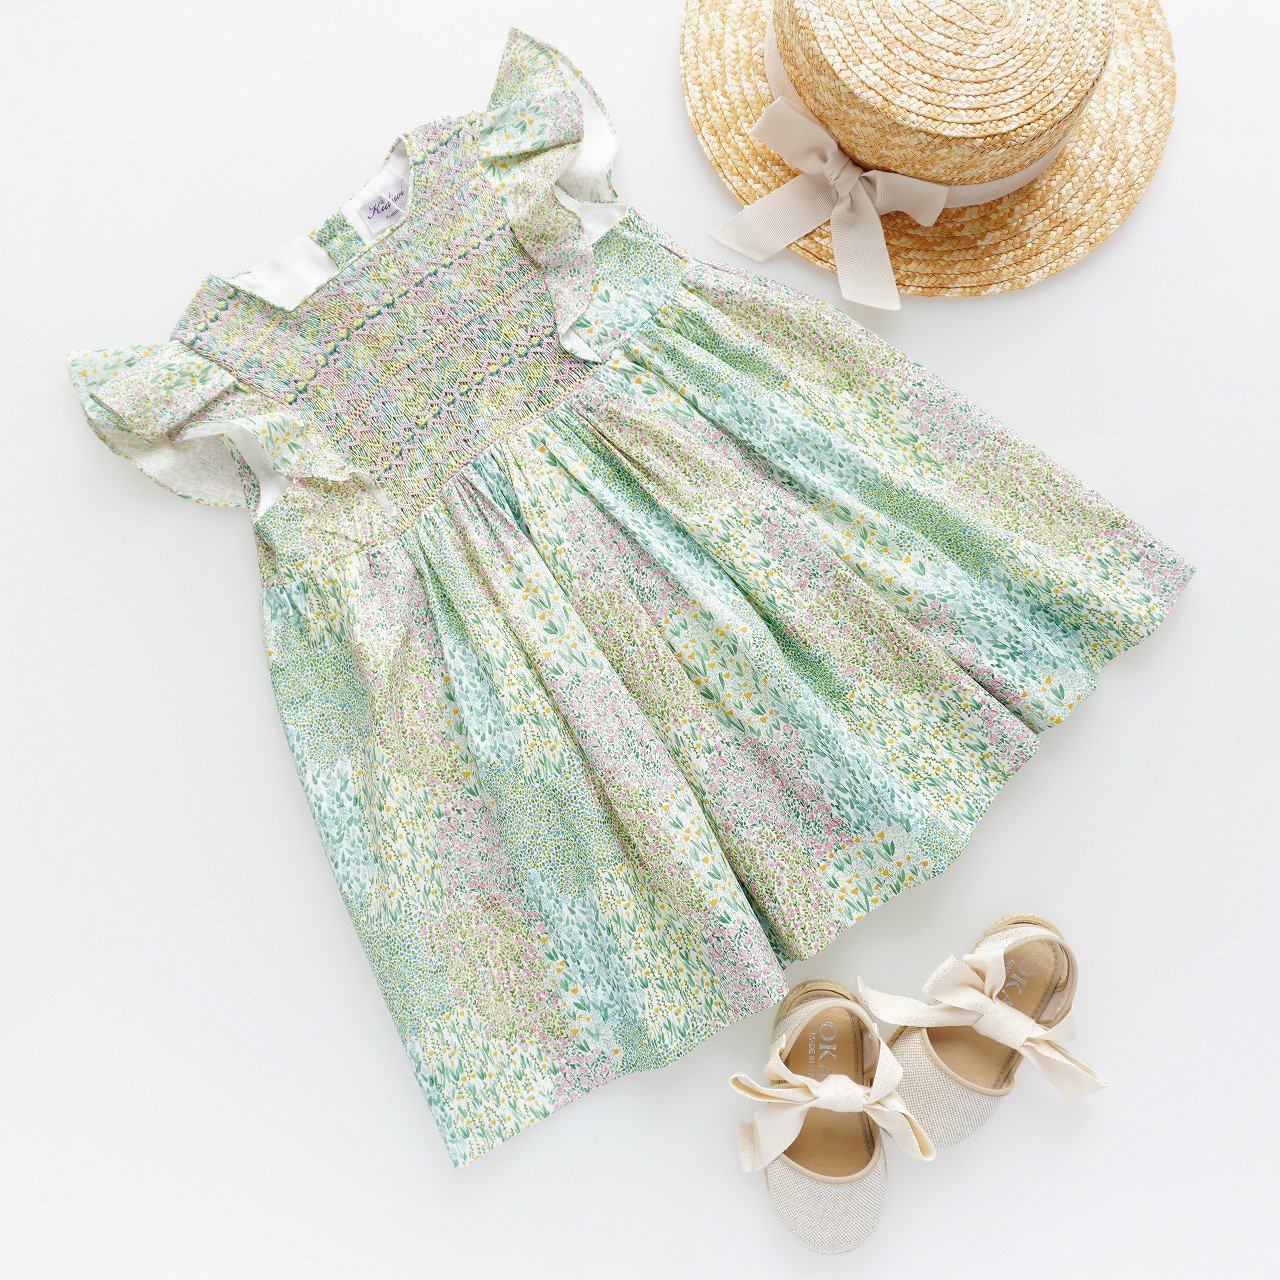 <img class='new_mark_img1' src='https://img.shop-pro.jp/img/new/icons1.gif' style='border:none;display:inline;margin:0px;padding:0px;width:auto;' />Kidiwi - Leanne dress (Green floral)